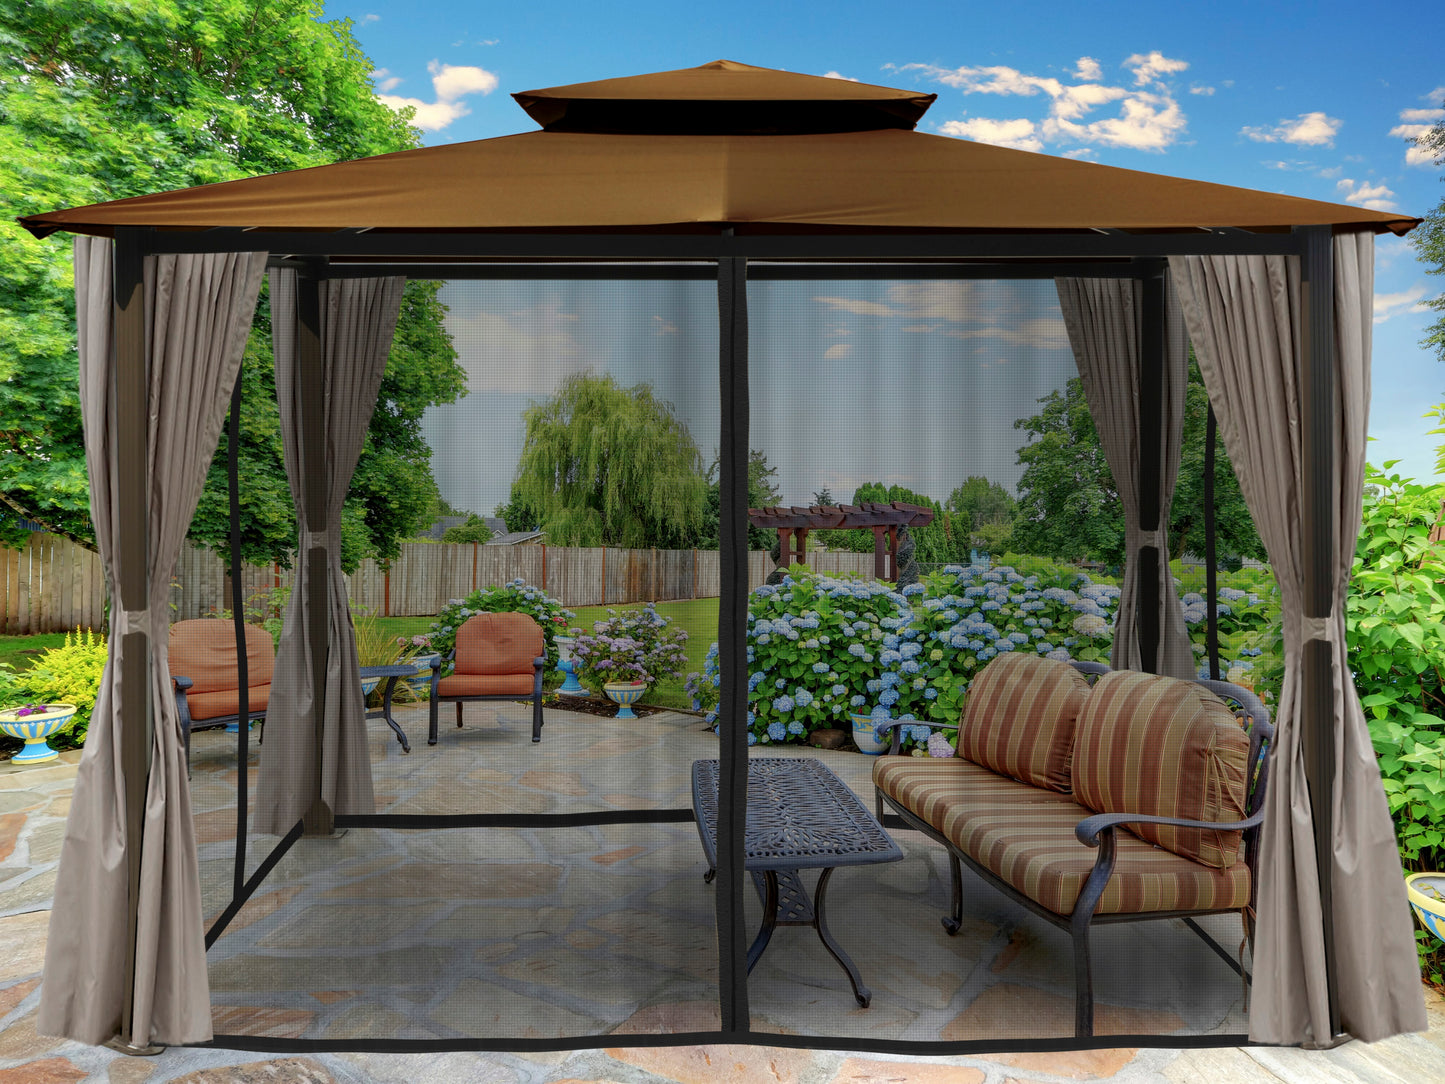 Privacy Curtains and Mosquito Netting for Barcelona Gazebo